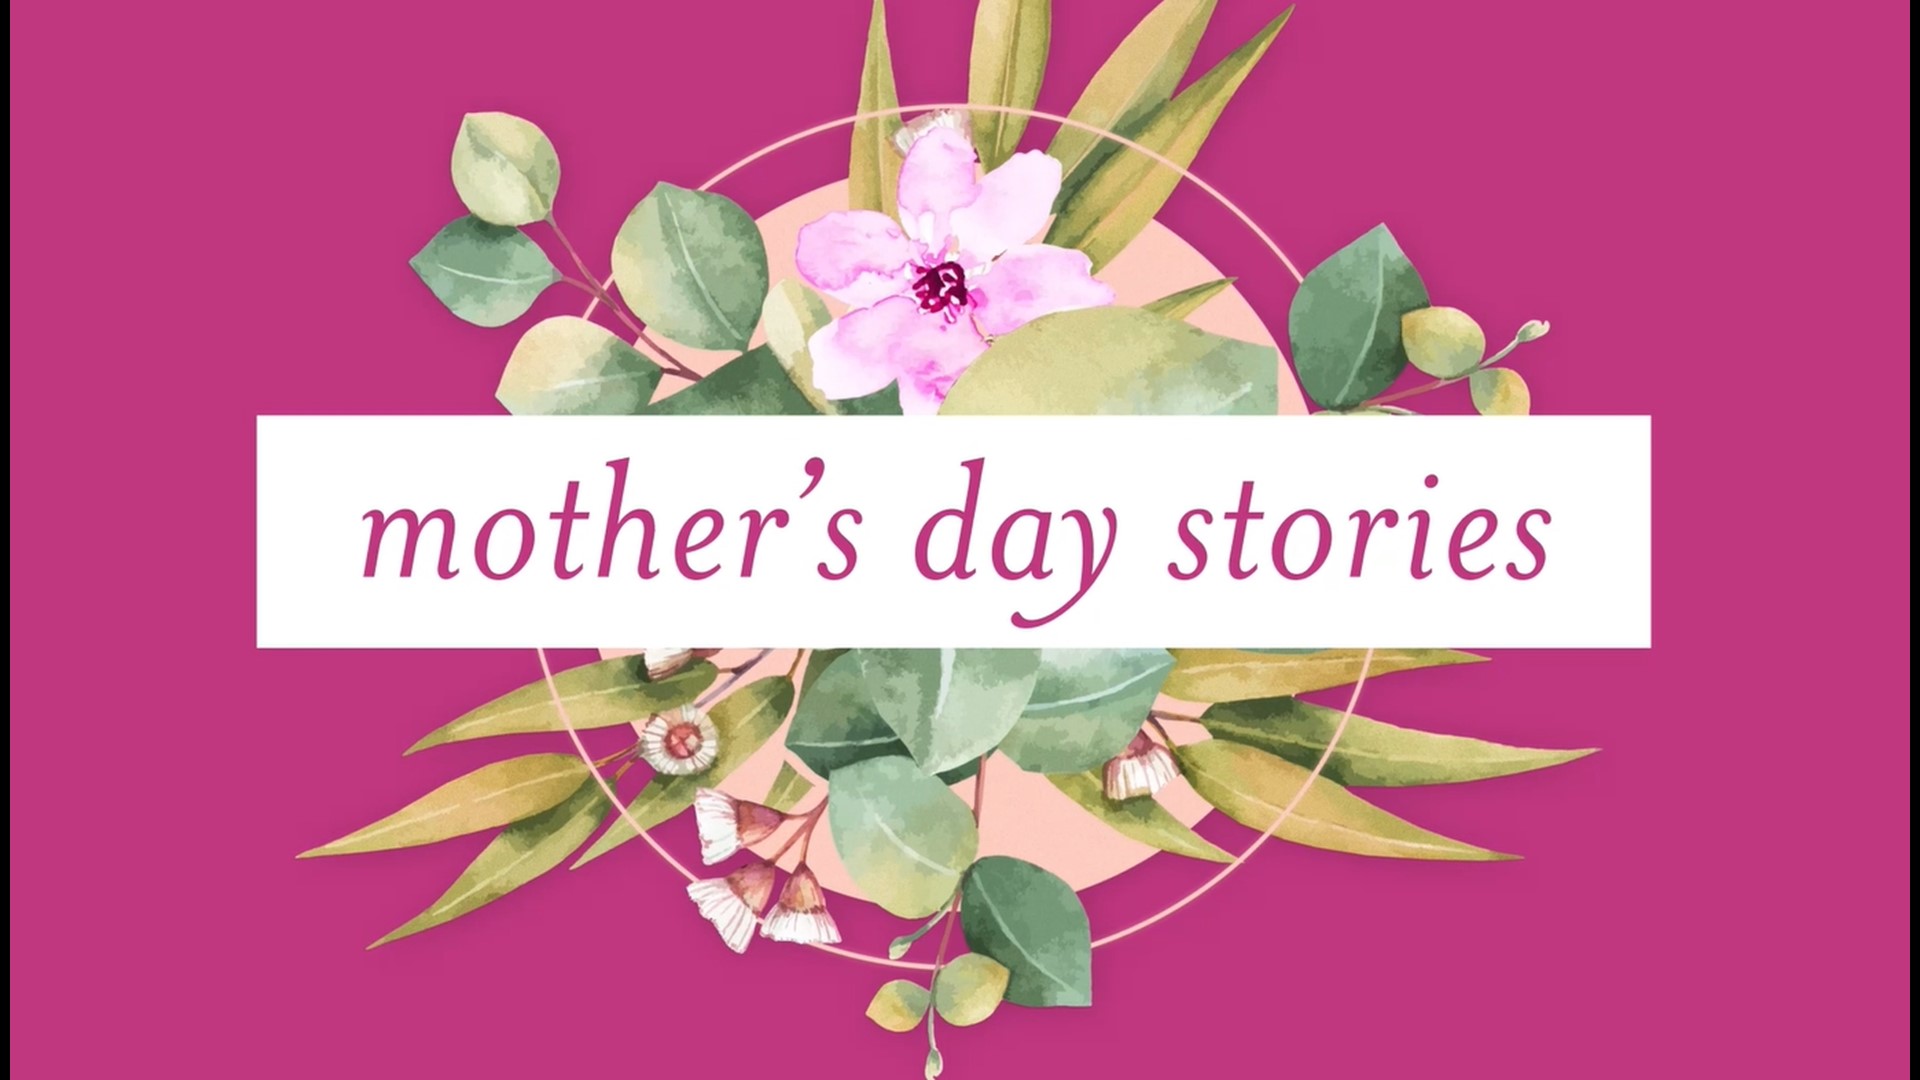 A collection of the best HeartThreads stories honoring moms for Mother's Day